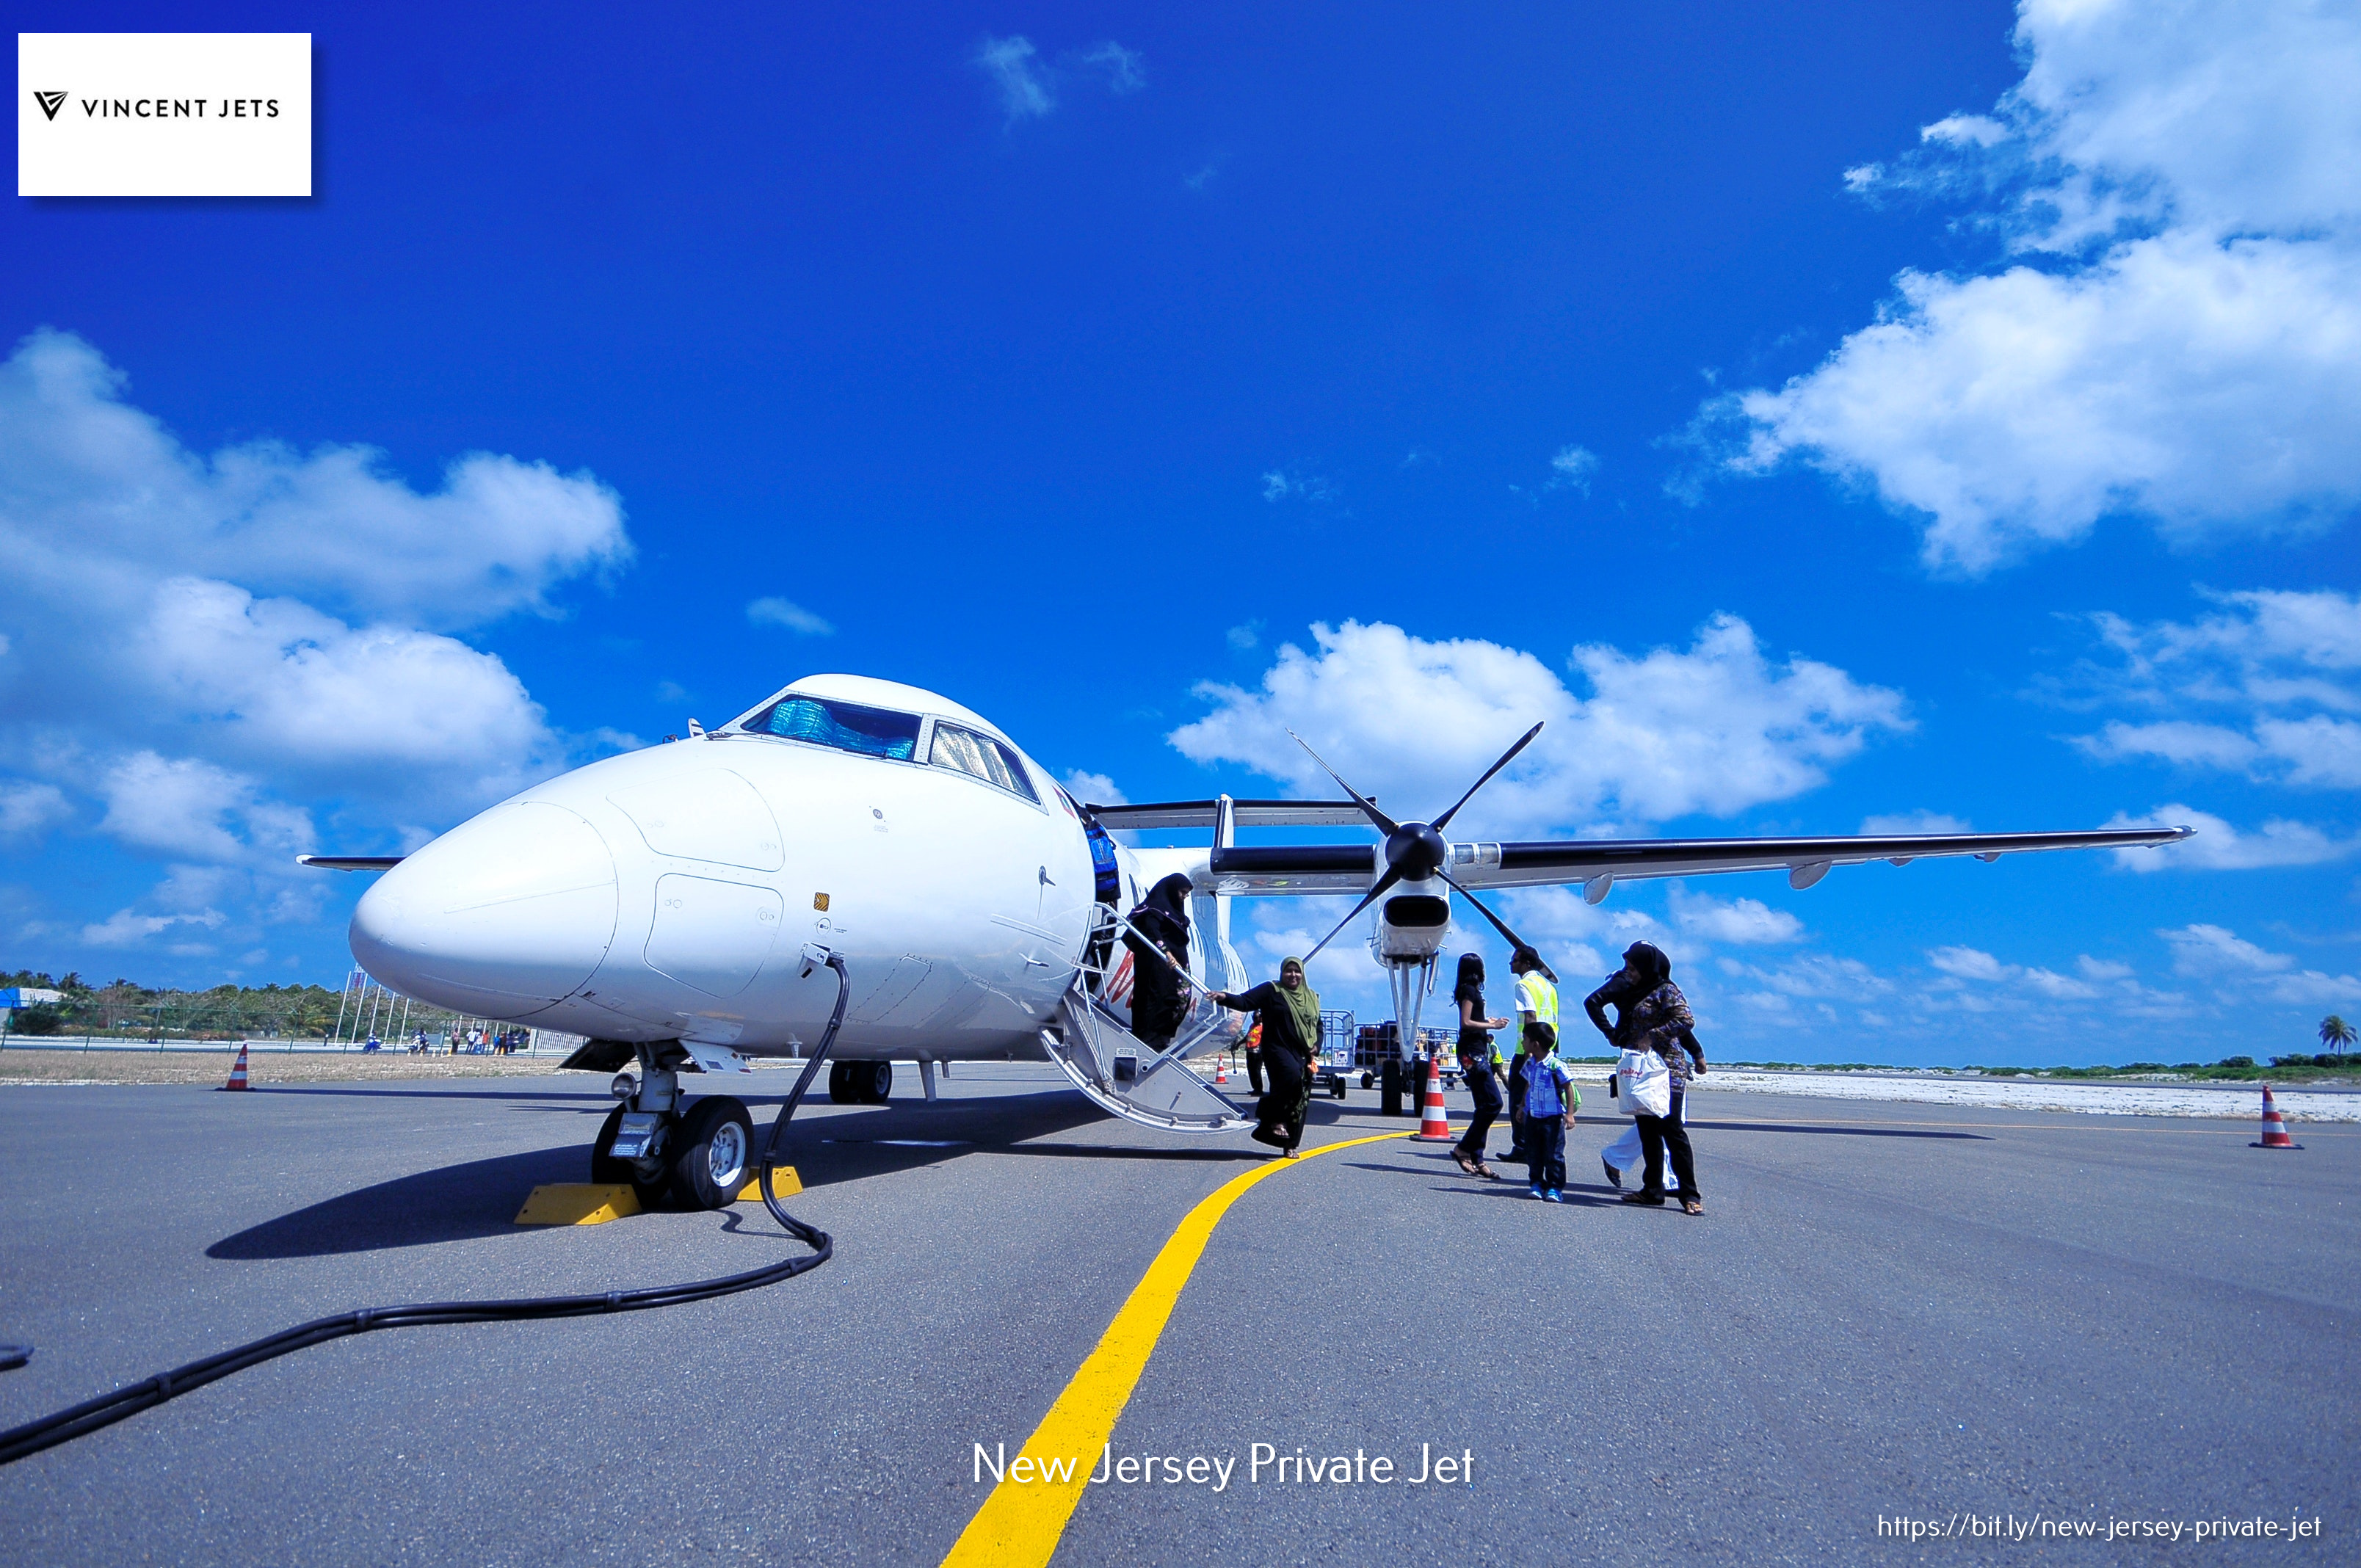 Vincent Jets Highlights the Reasons for Considering a Private Jet Hire